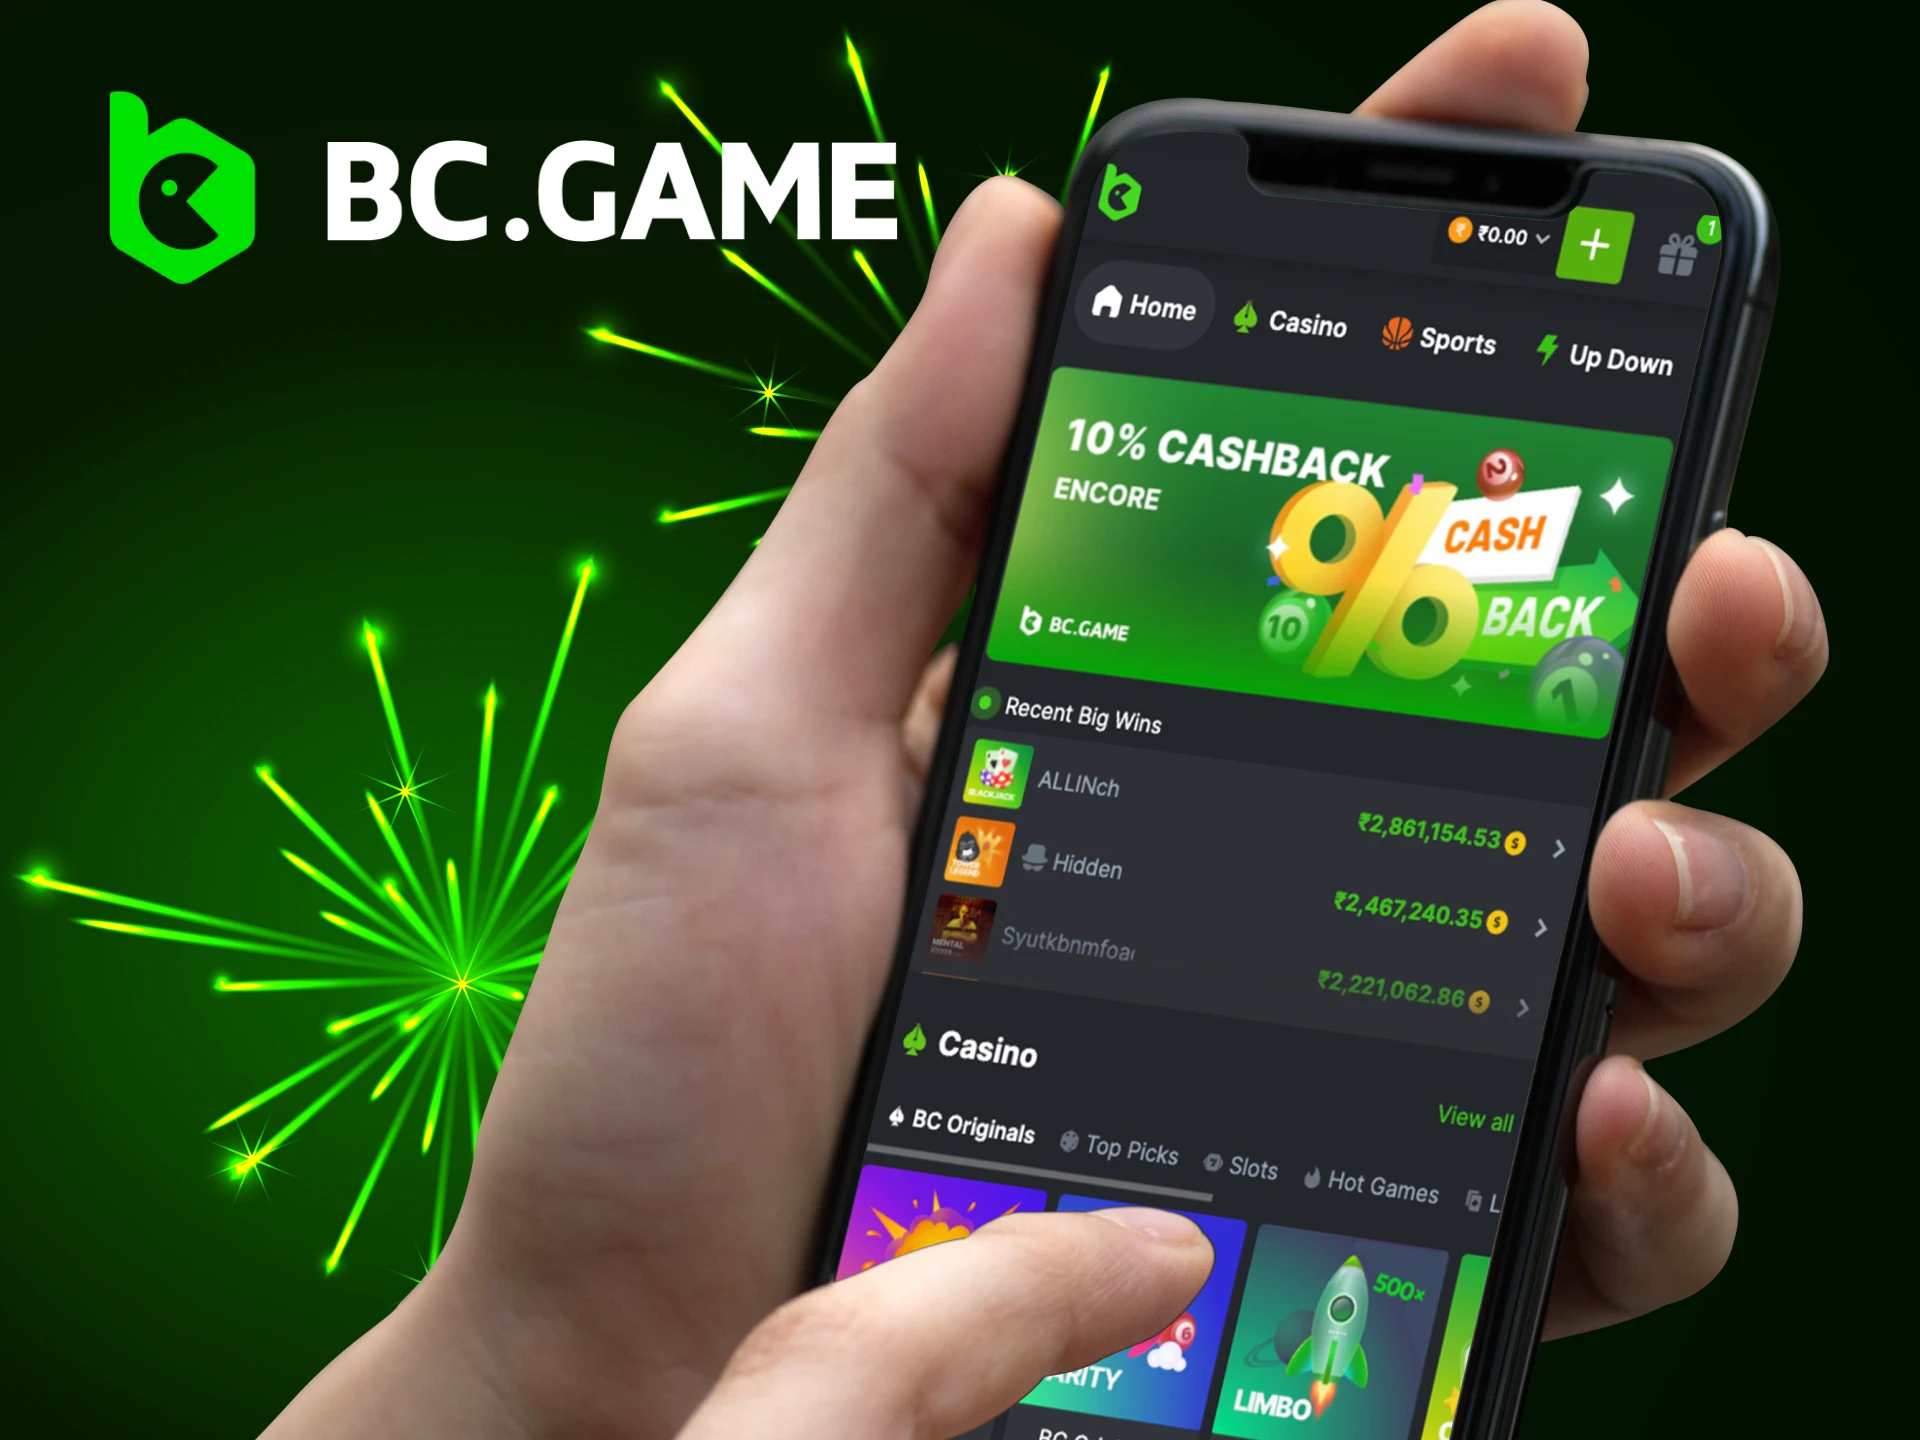 The BC Game app has a number of features.